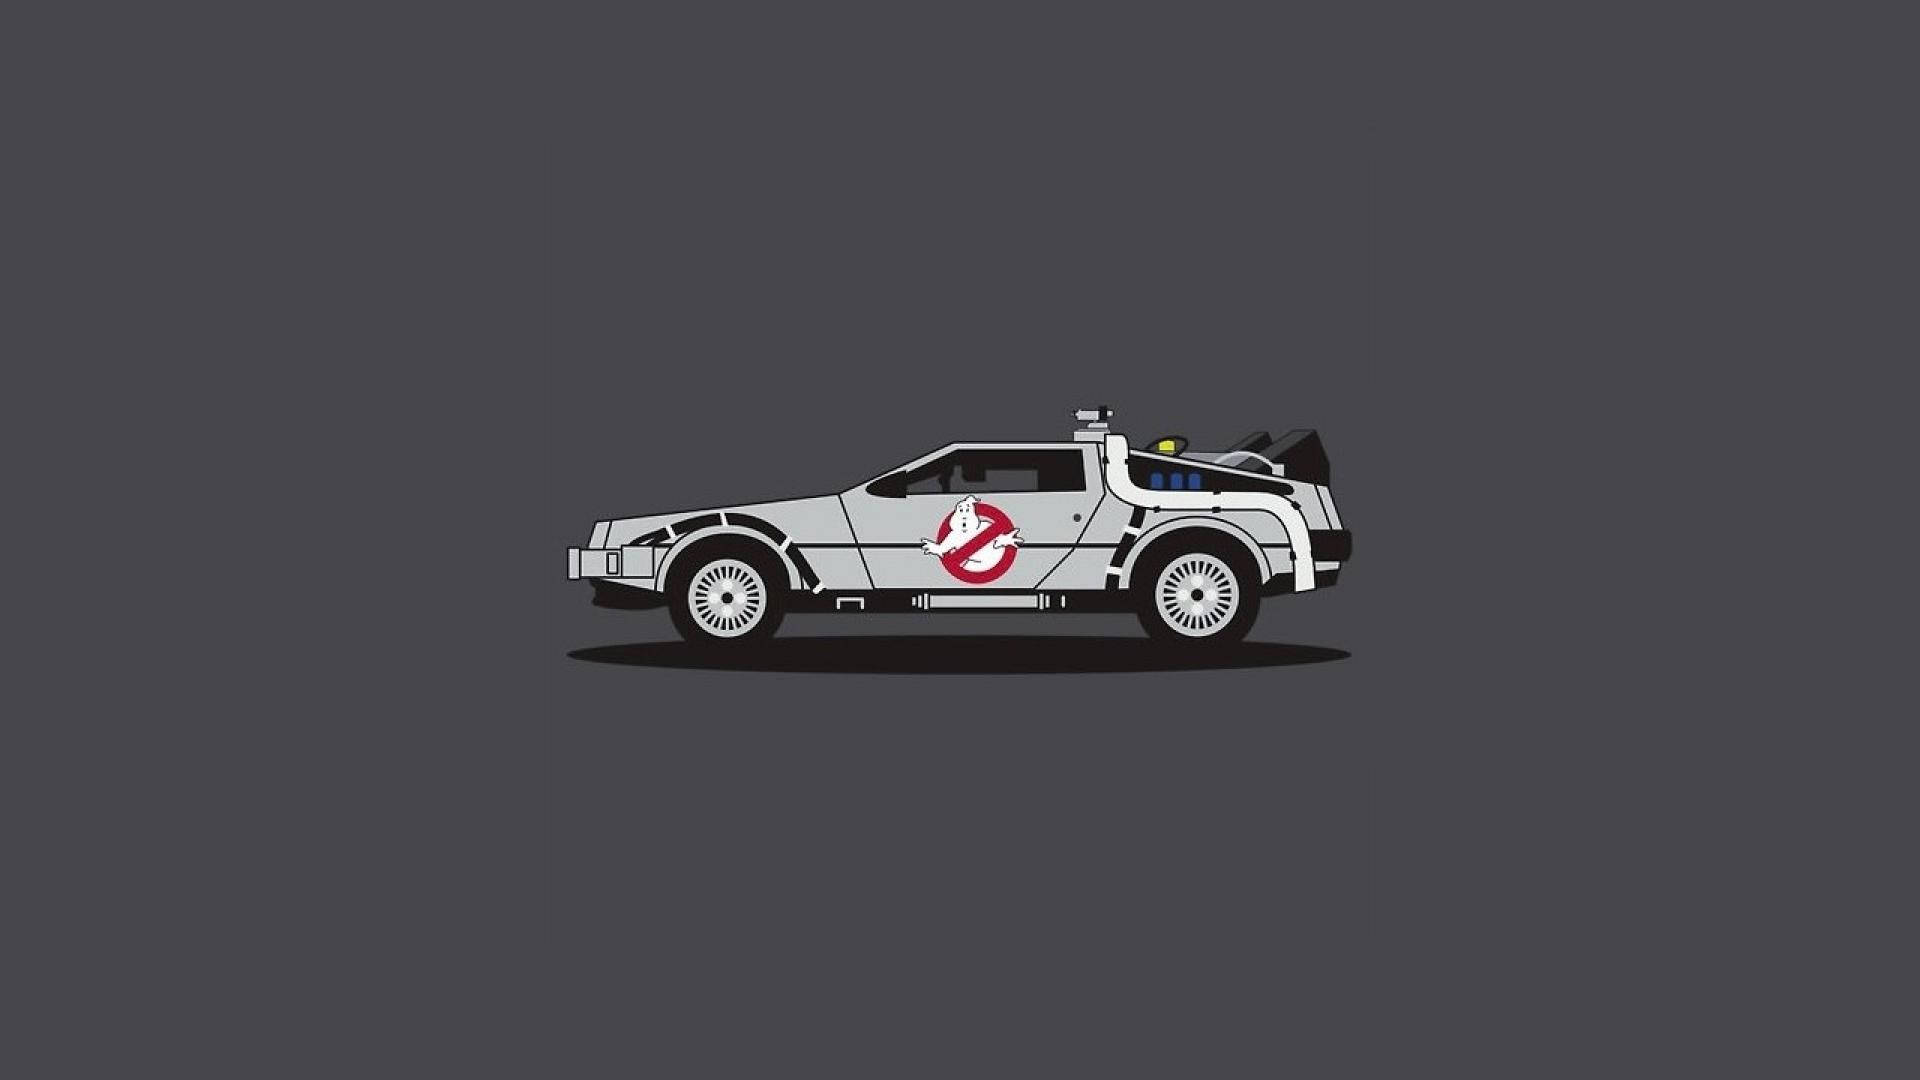 Free Back To The Future Wallpaper Downloads 100 Back To The Future Wallpapers For Free Wallpapers Com